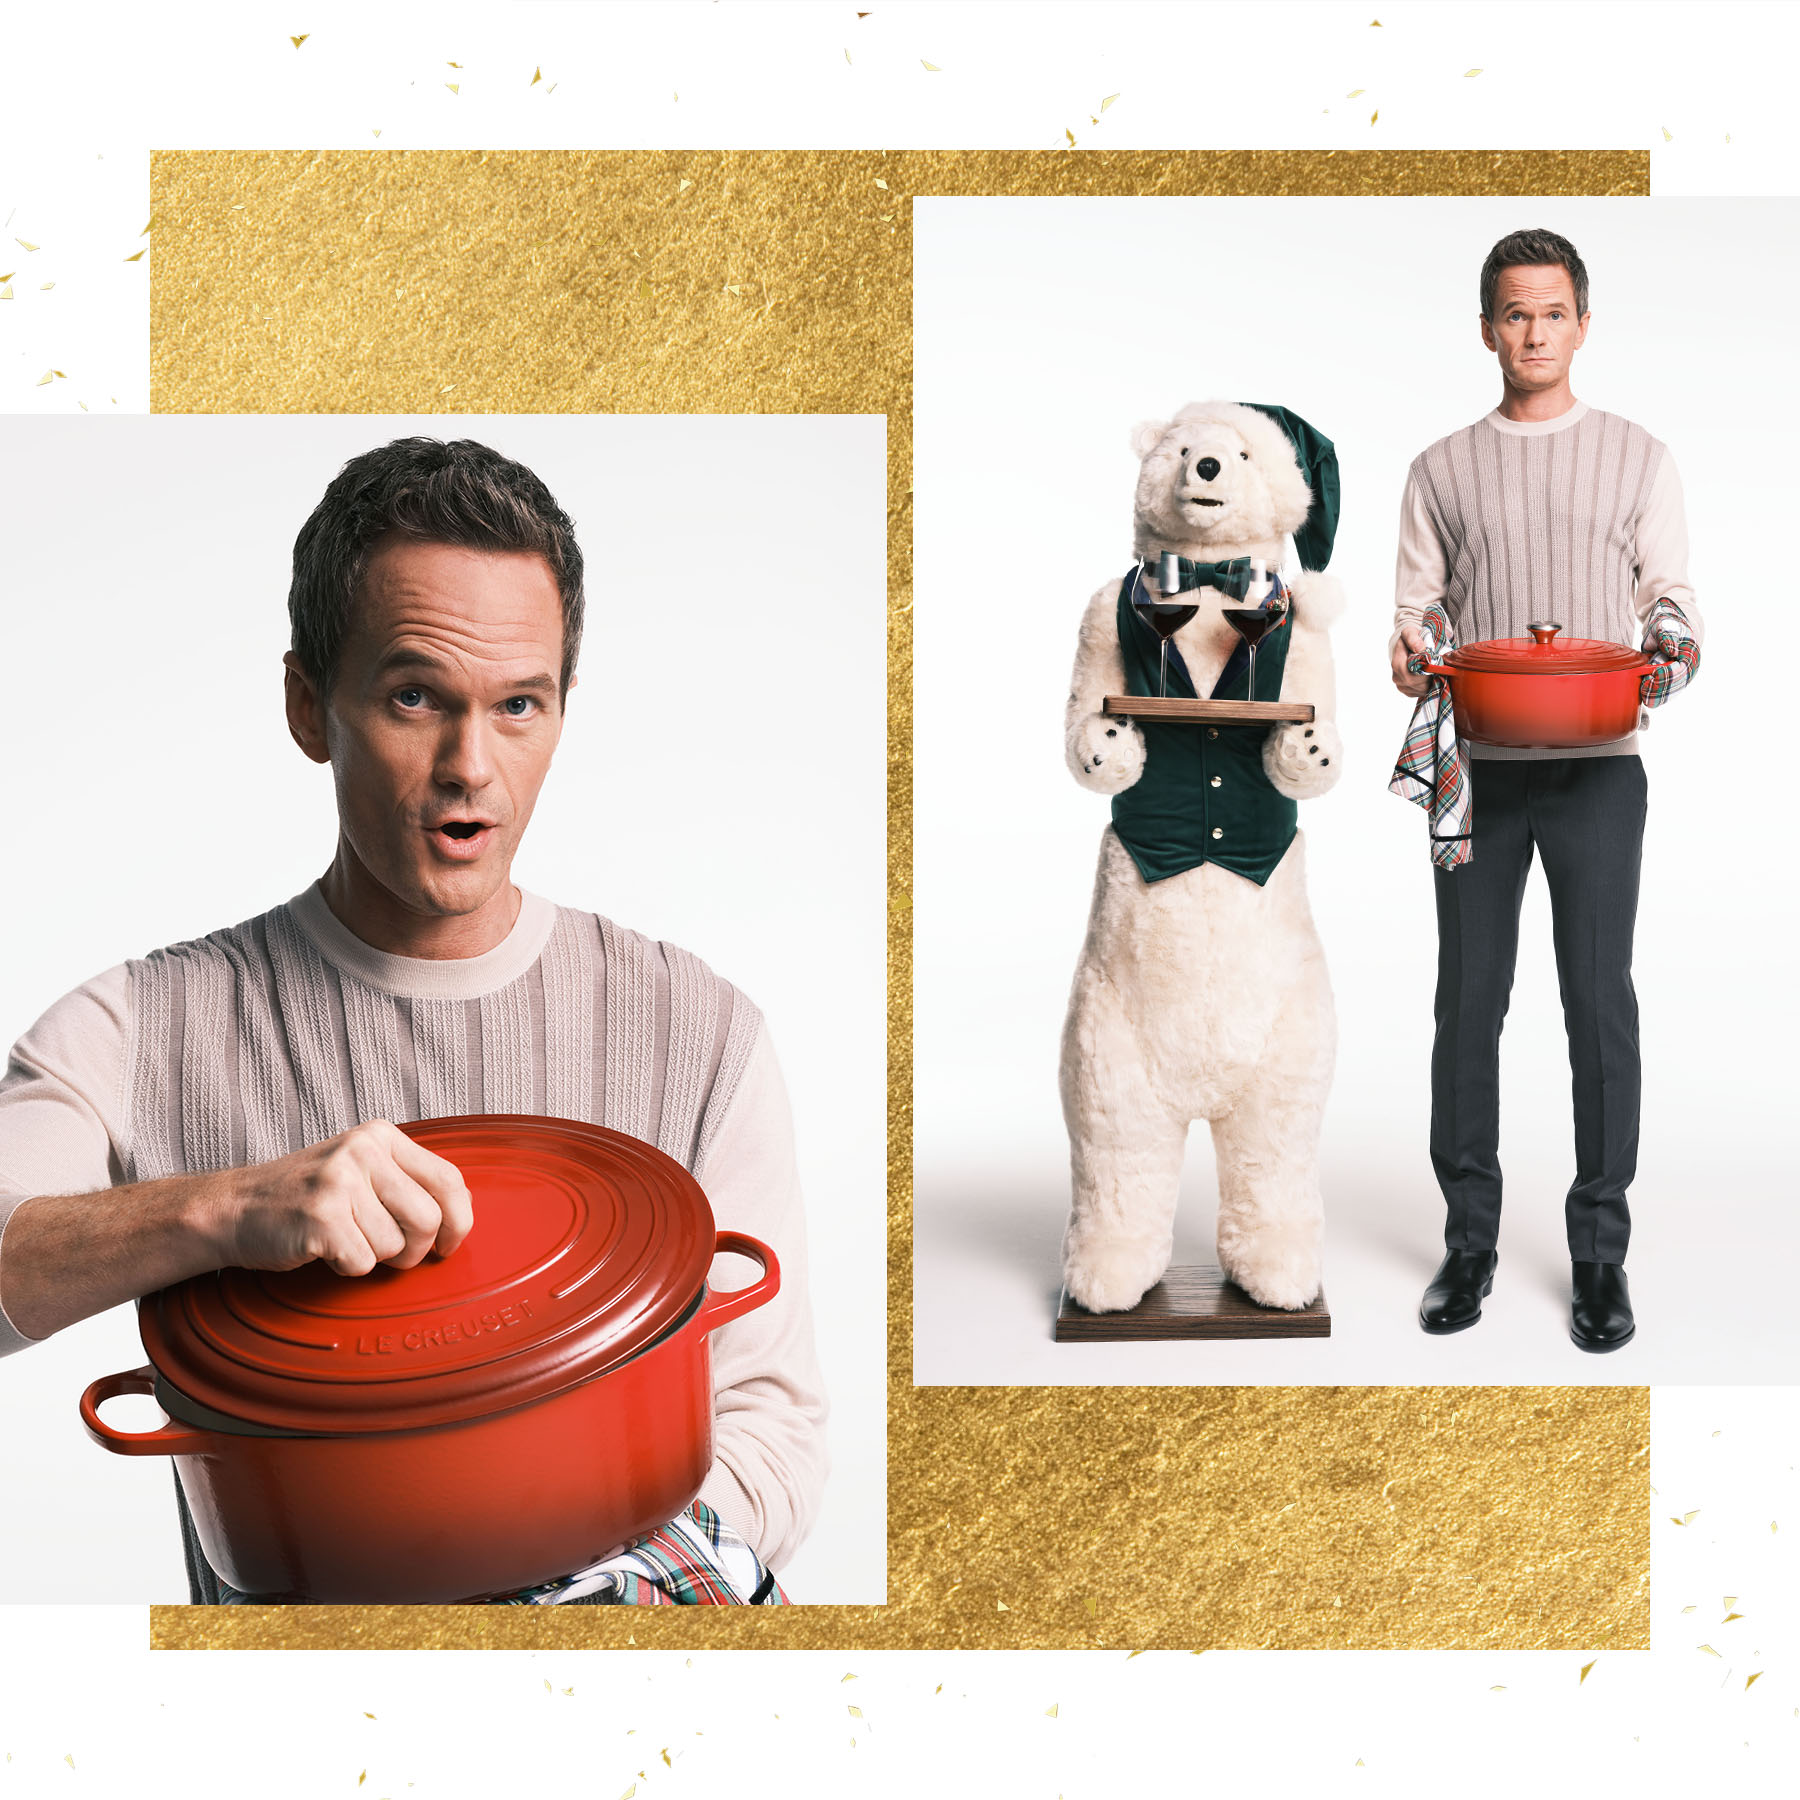 neil in a sweater holding a le cruset pot standing next to an oversized stuffed plush bear in a santa outfit